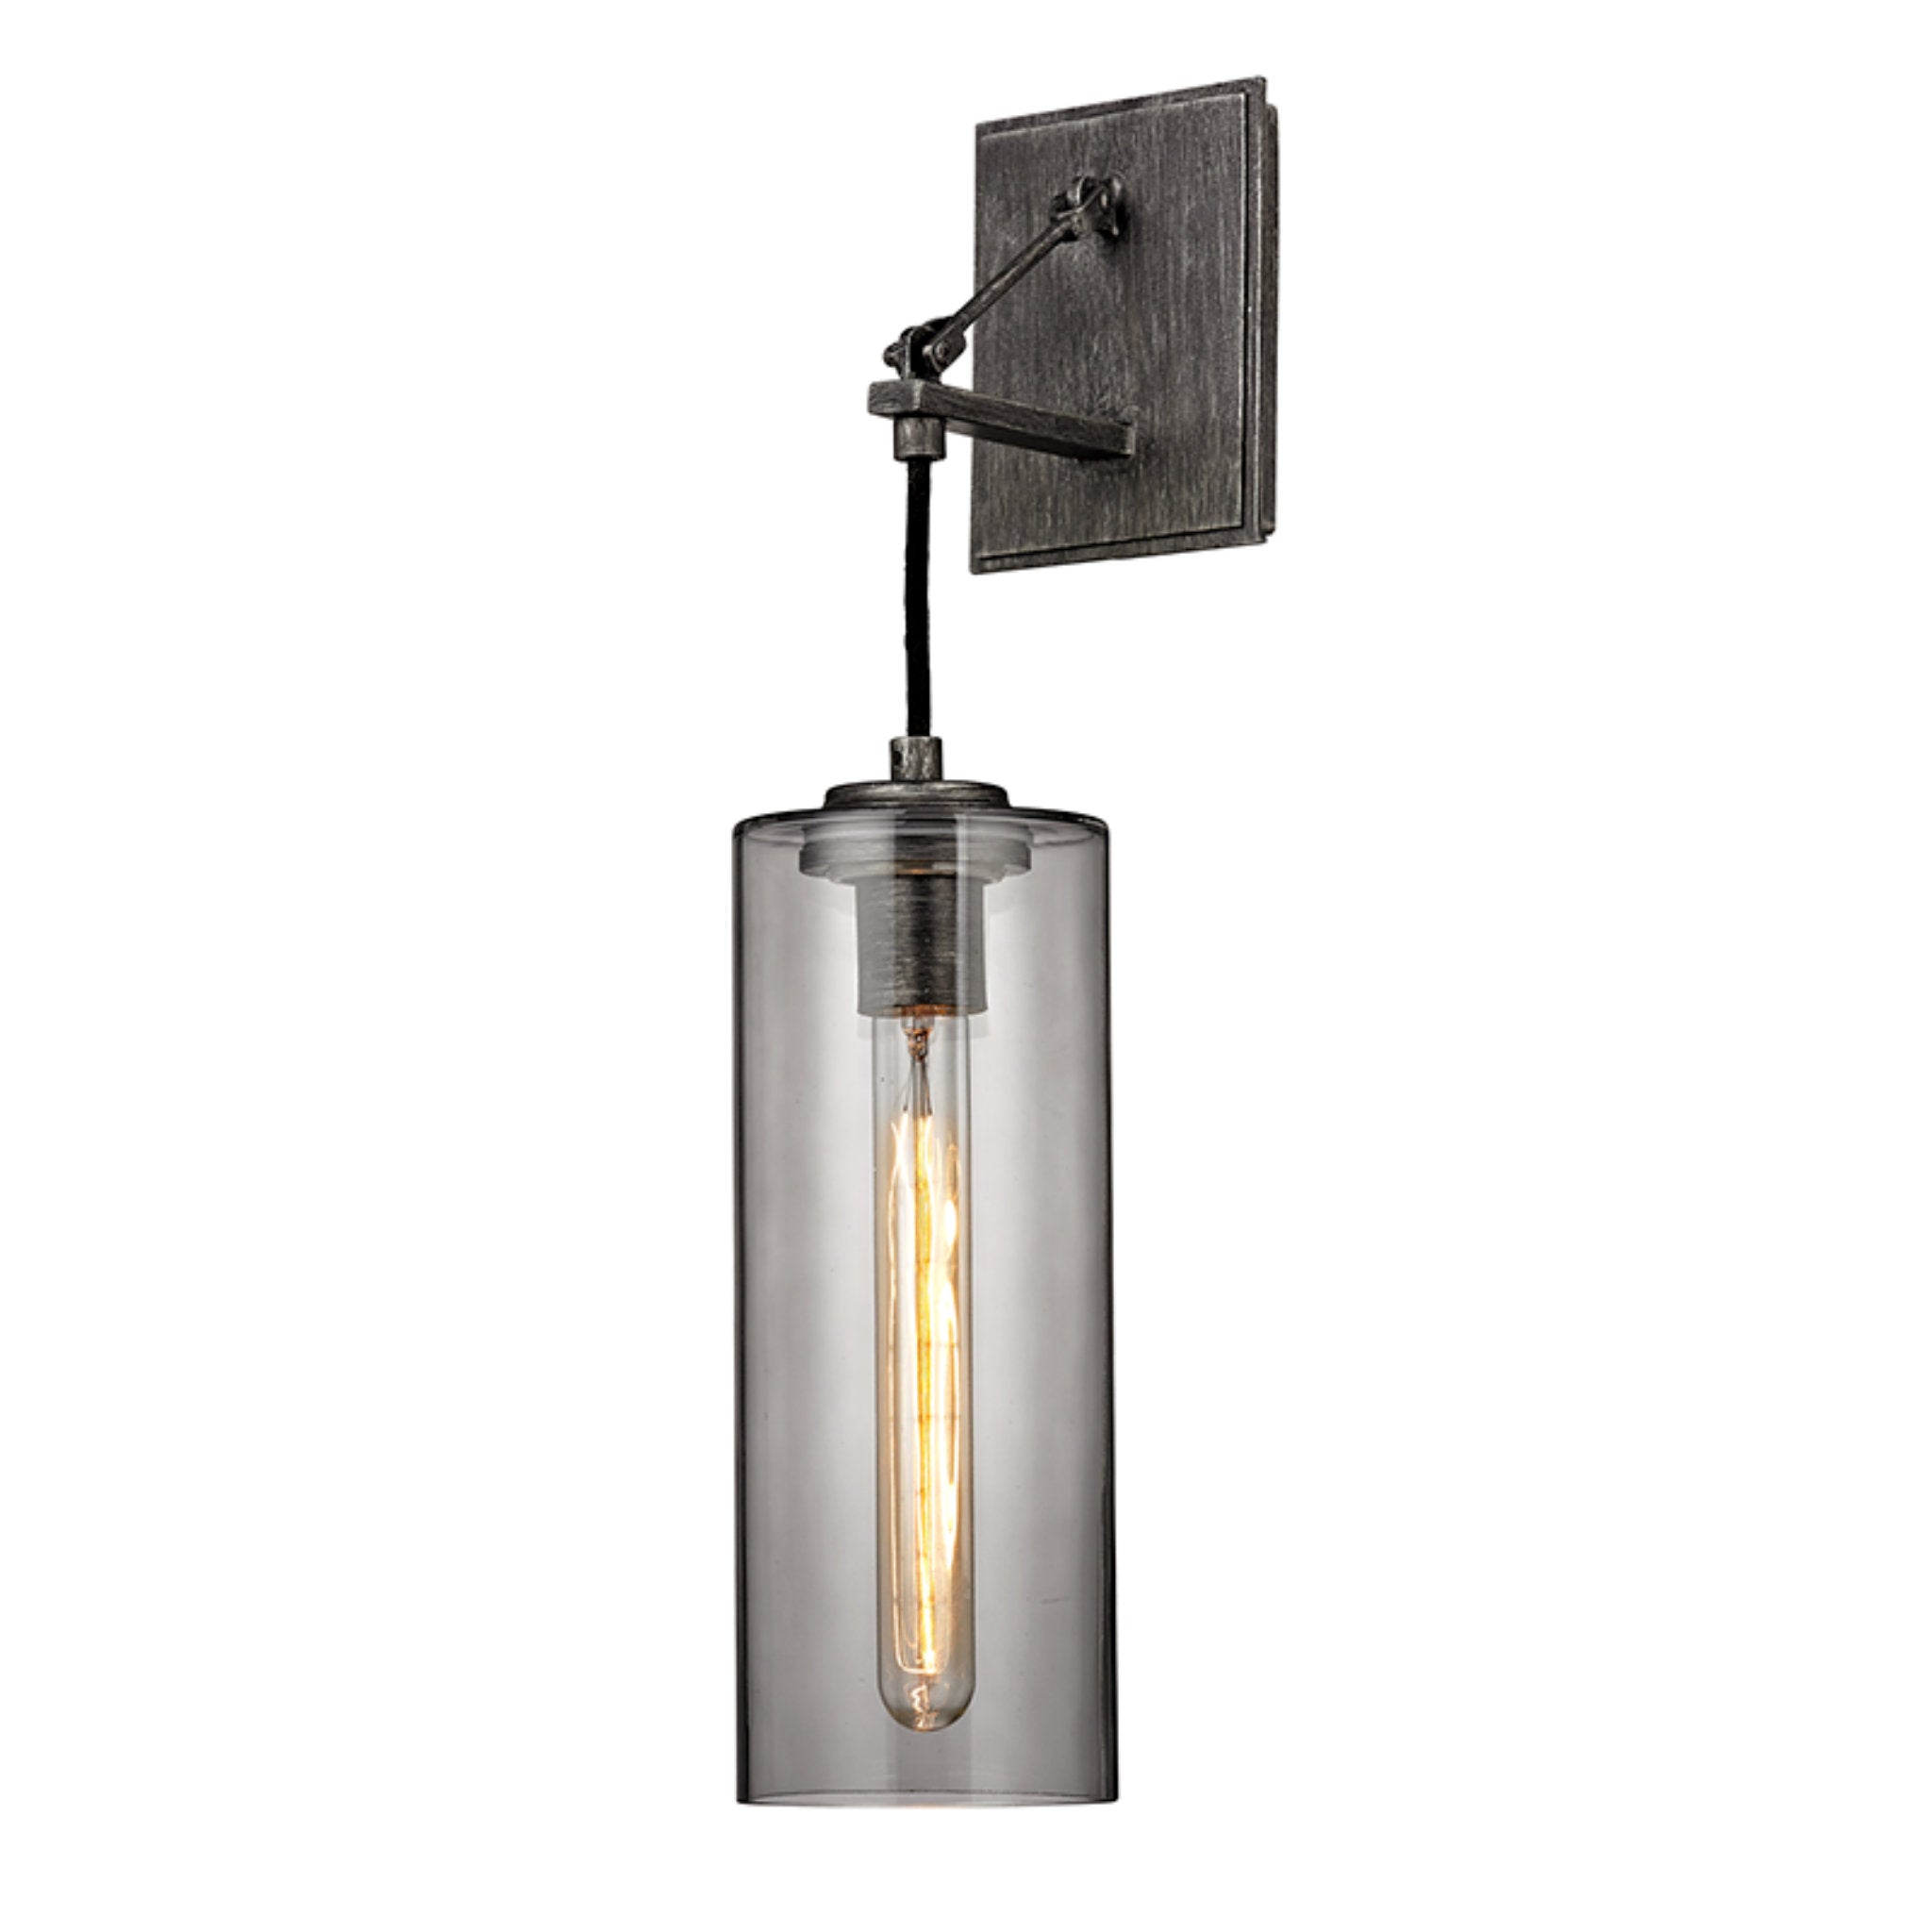 Union Square 1 Light Wall Sconce in Graphite